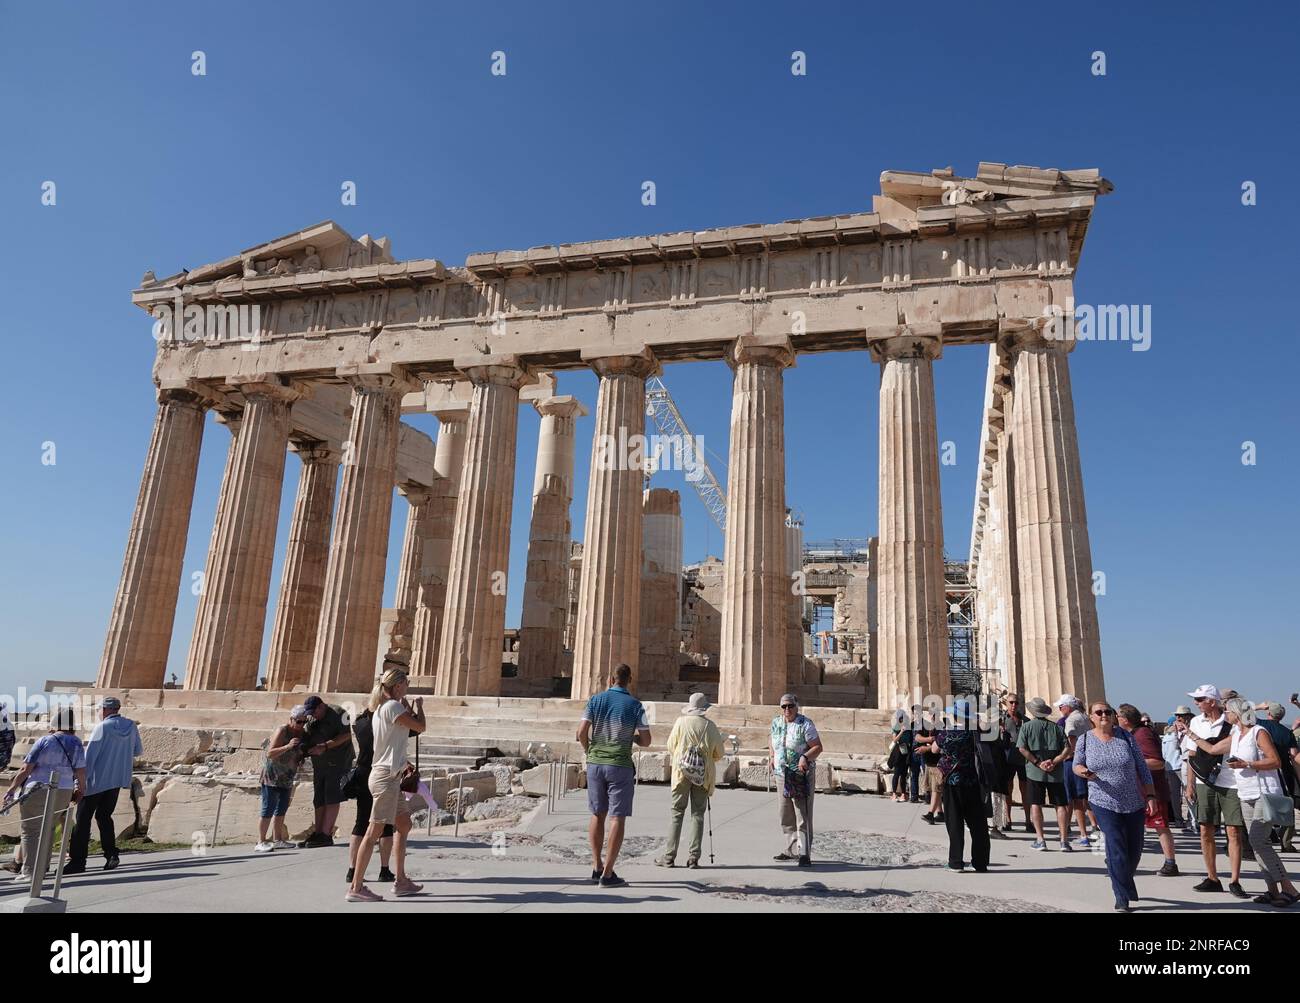 The Parthenon, a former temple on the Athenian Acropolis, Greece, that was dedicated to the goddess Athena during the fifth century BC Stock Photo